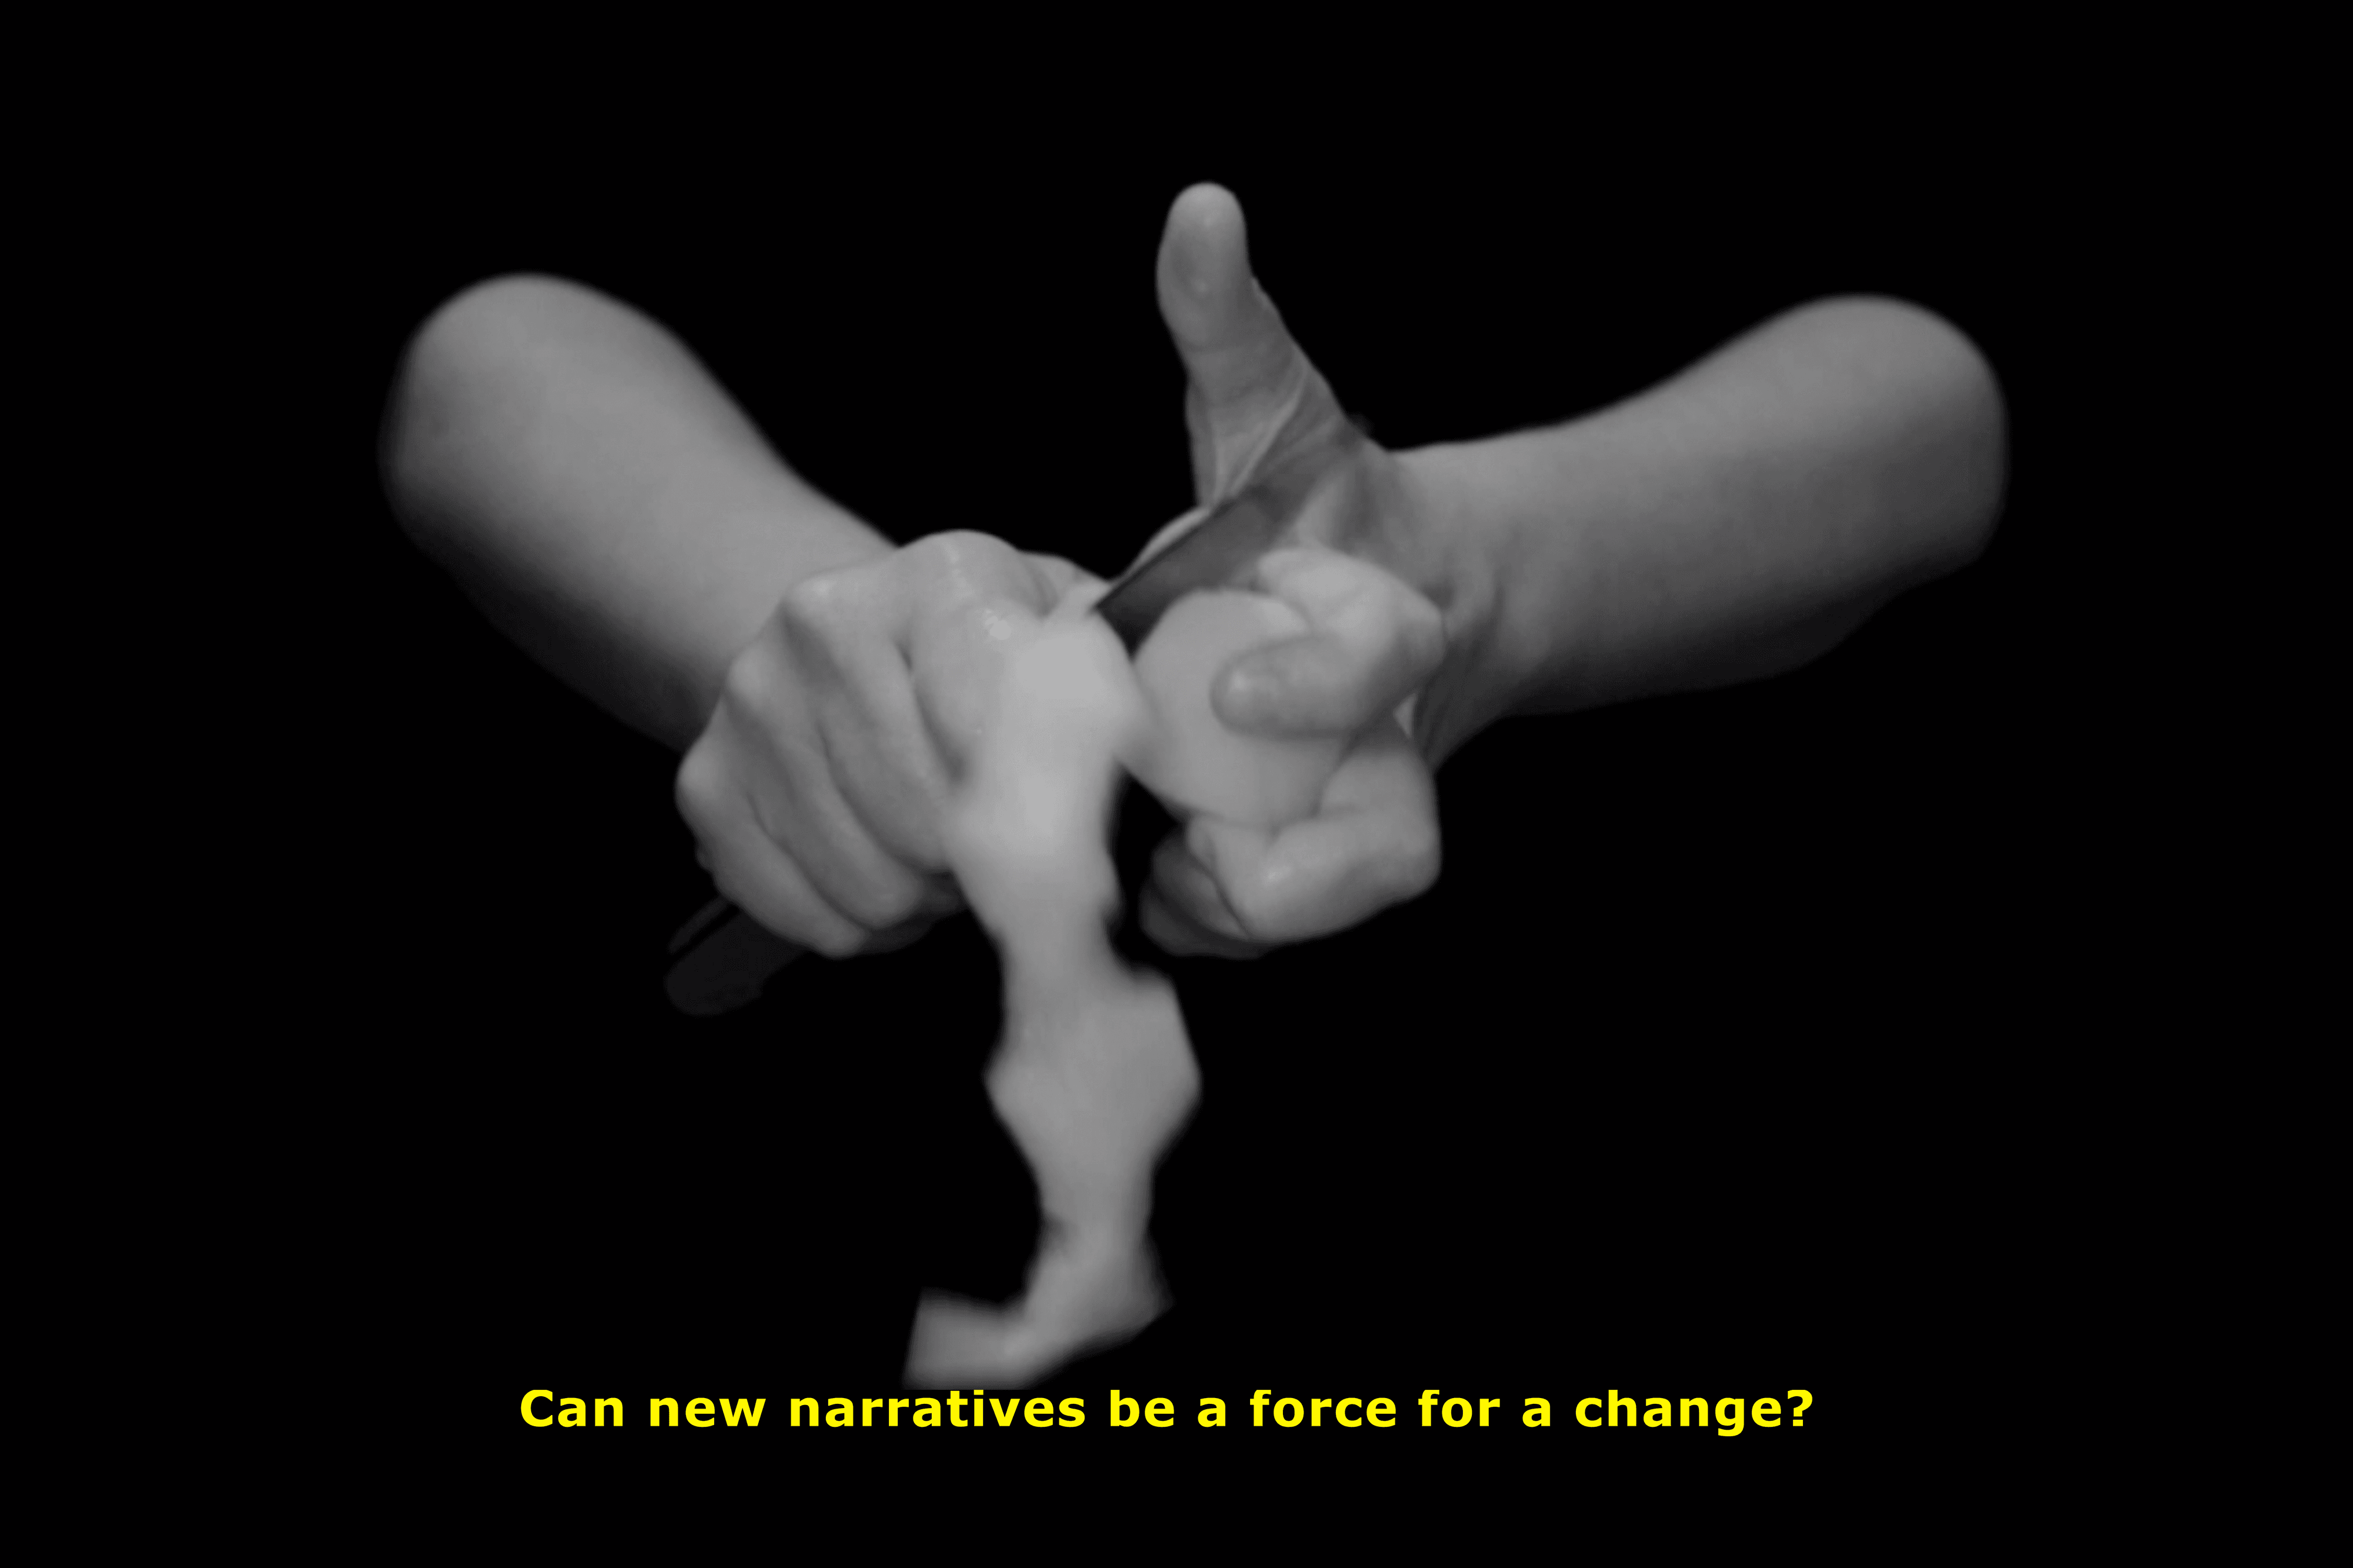 Can new narratives be a force for a change?